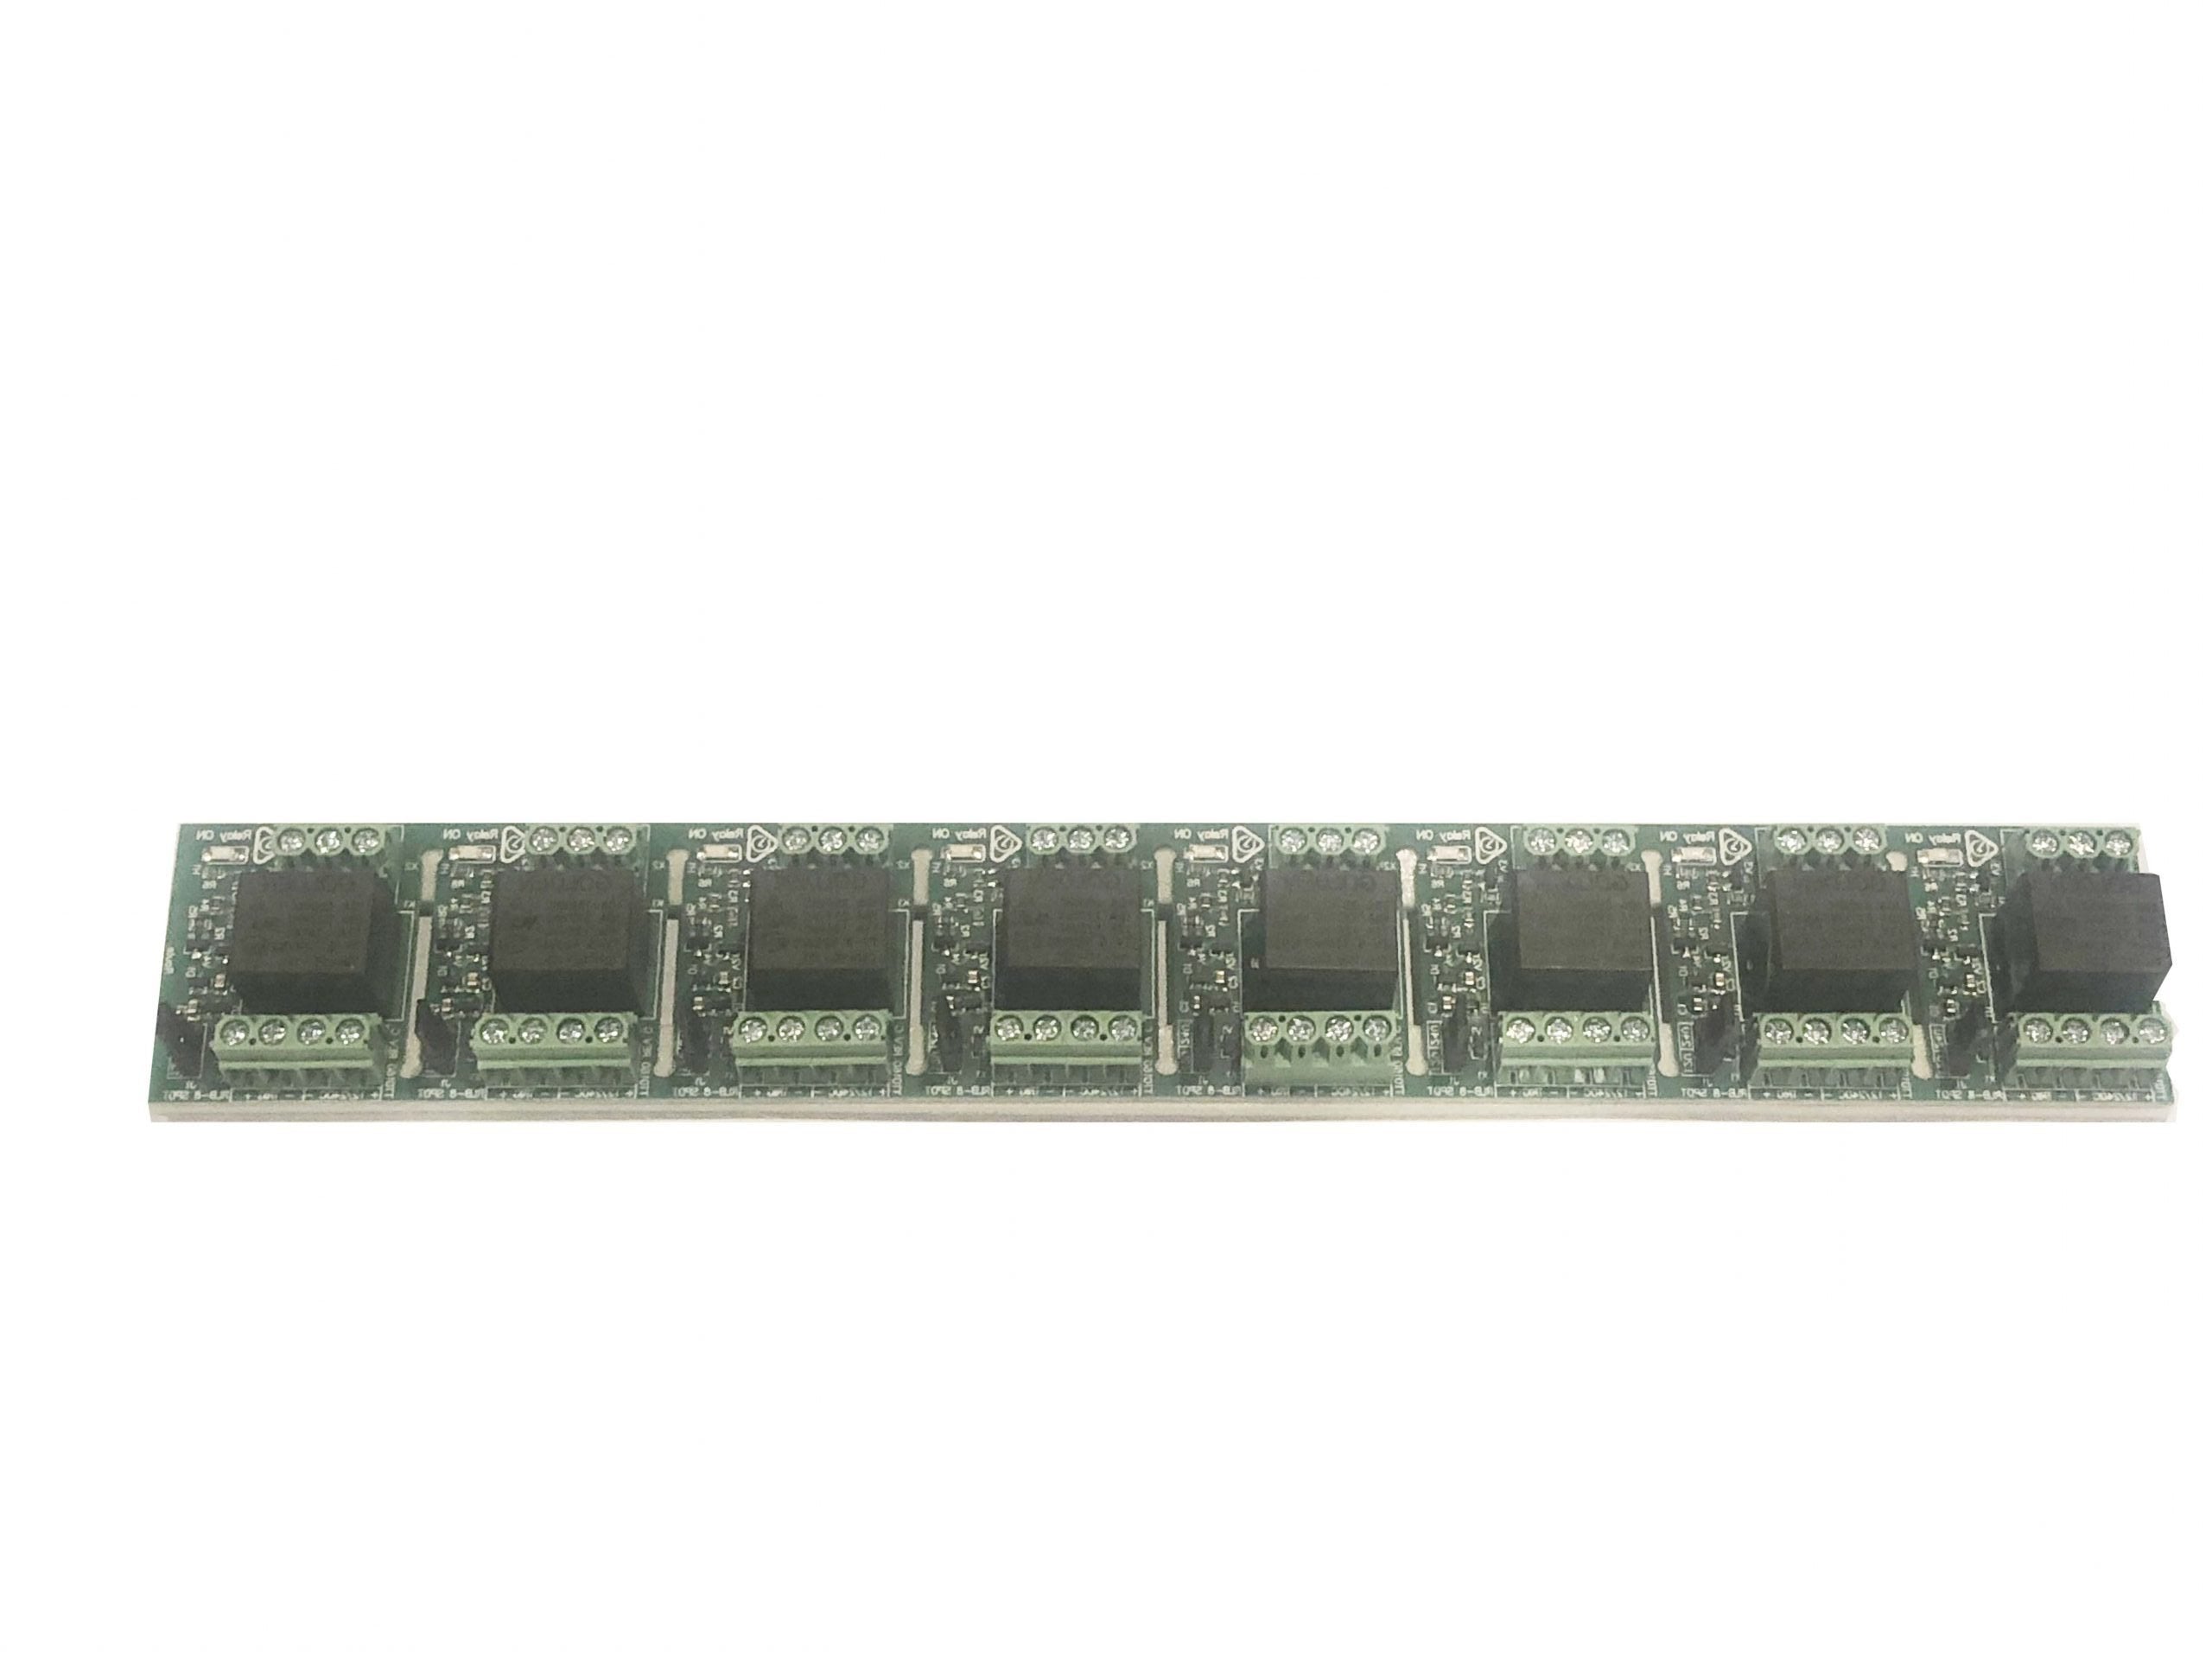 Tactical* 12V/24DC Jumper Selectable SPDT Dual Input, Buffered Relay Board. [30VDC 6A Contacts] - Strip Of 8 DIN Rail Mount